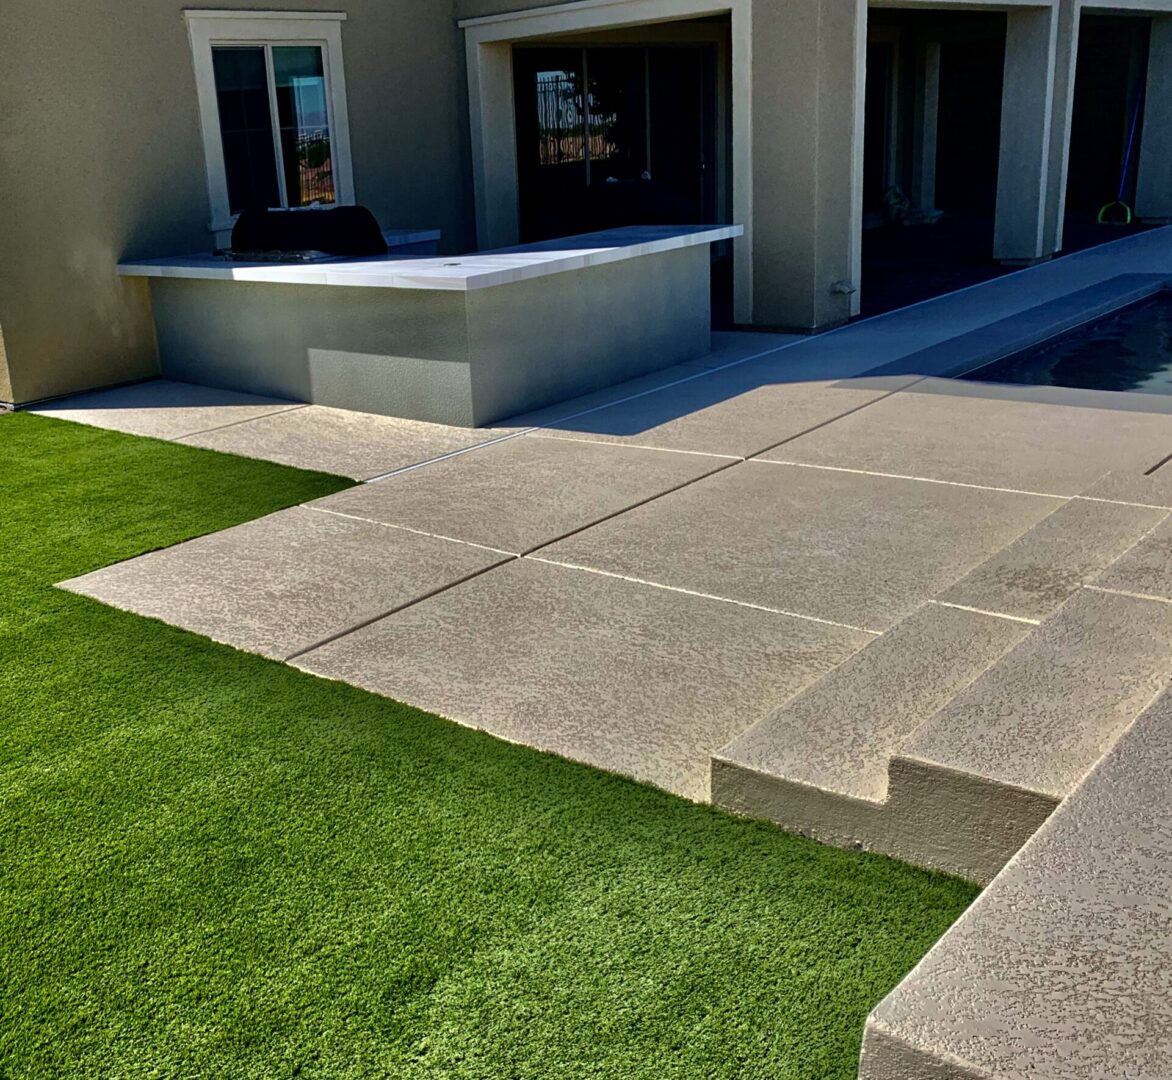 A concrete patio with steps leading to the garage.